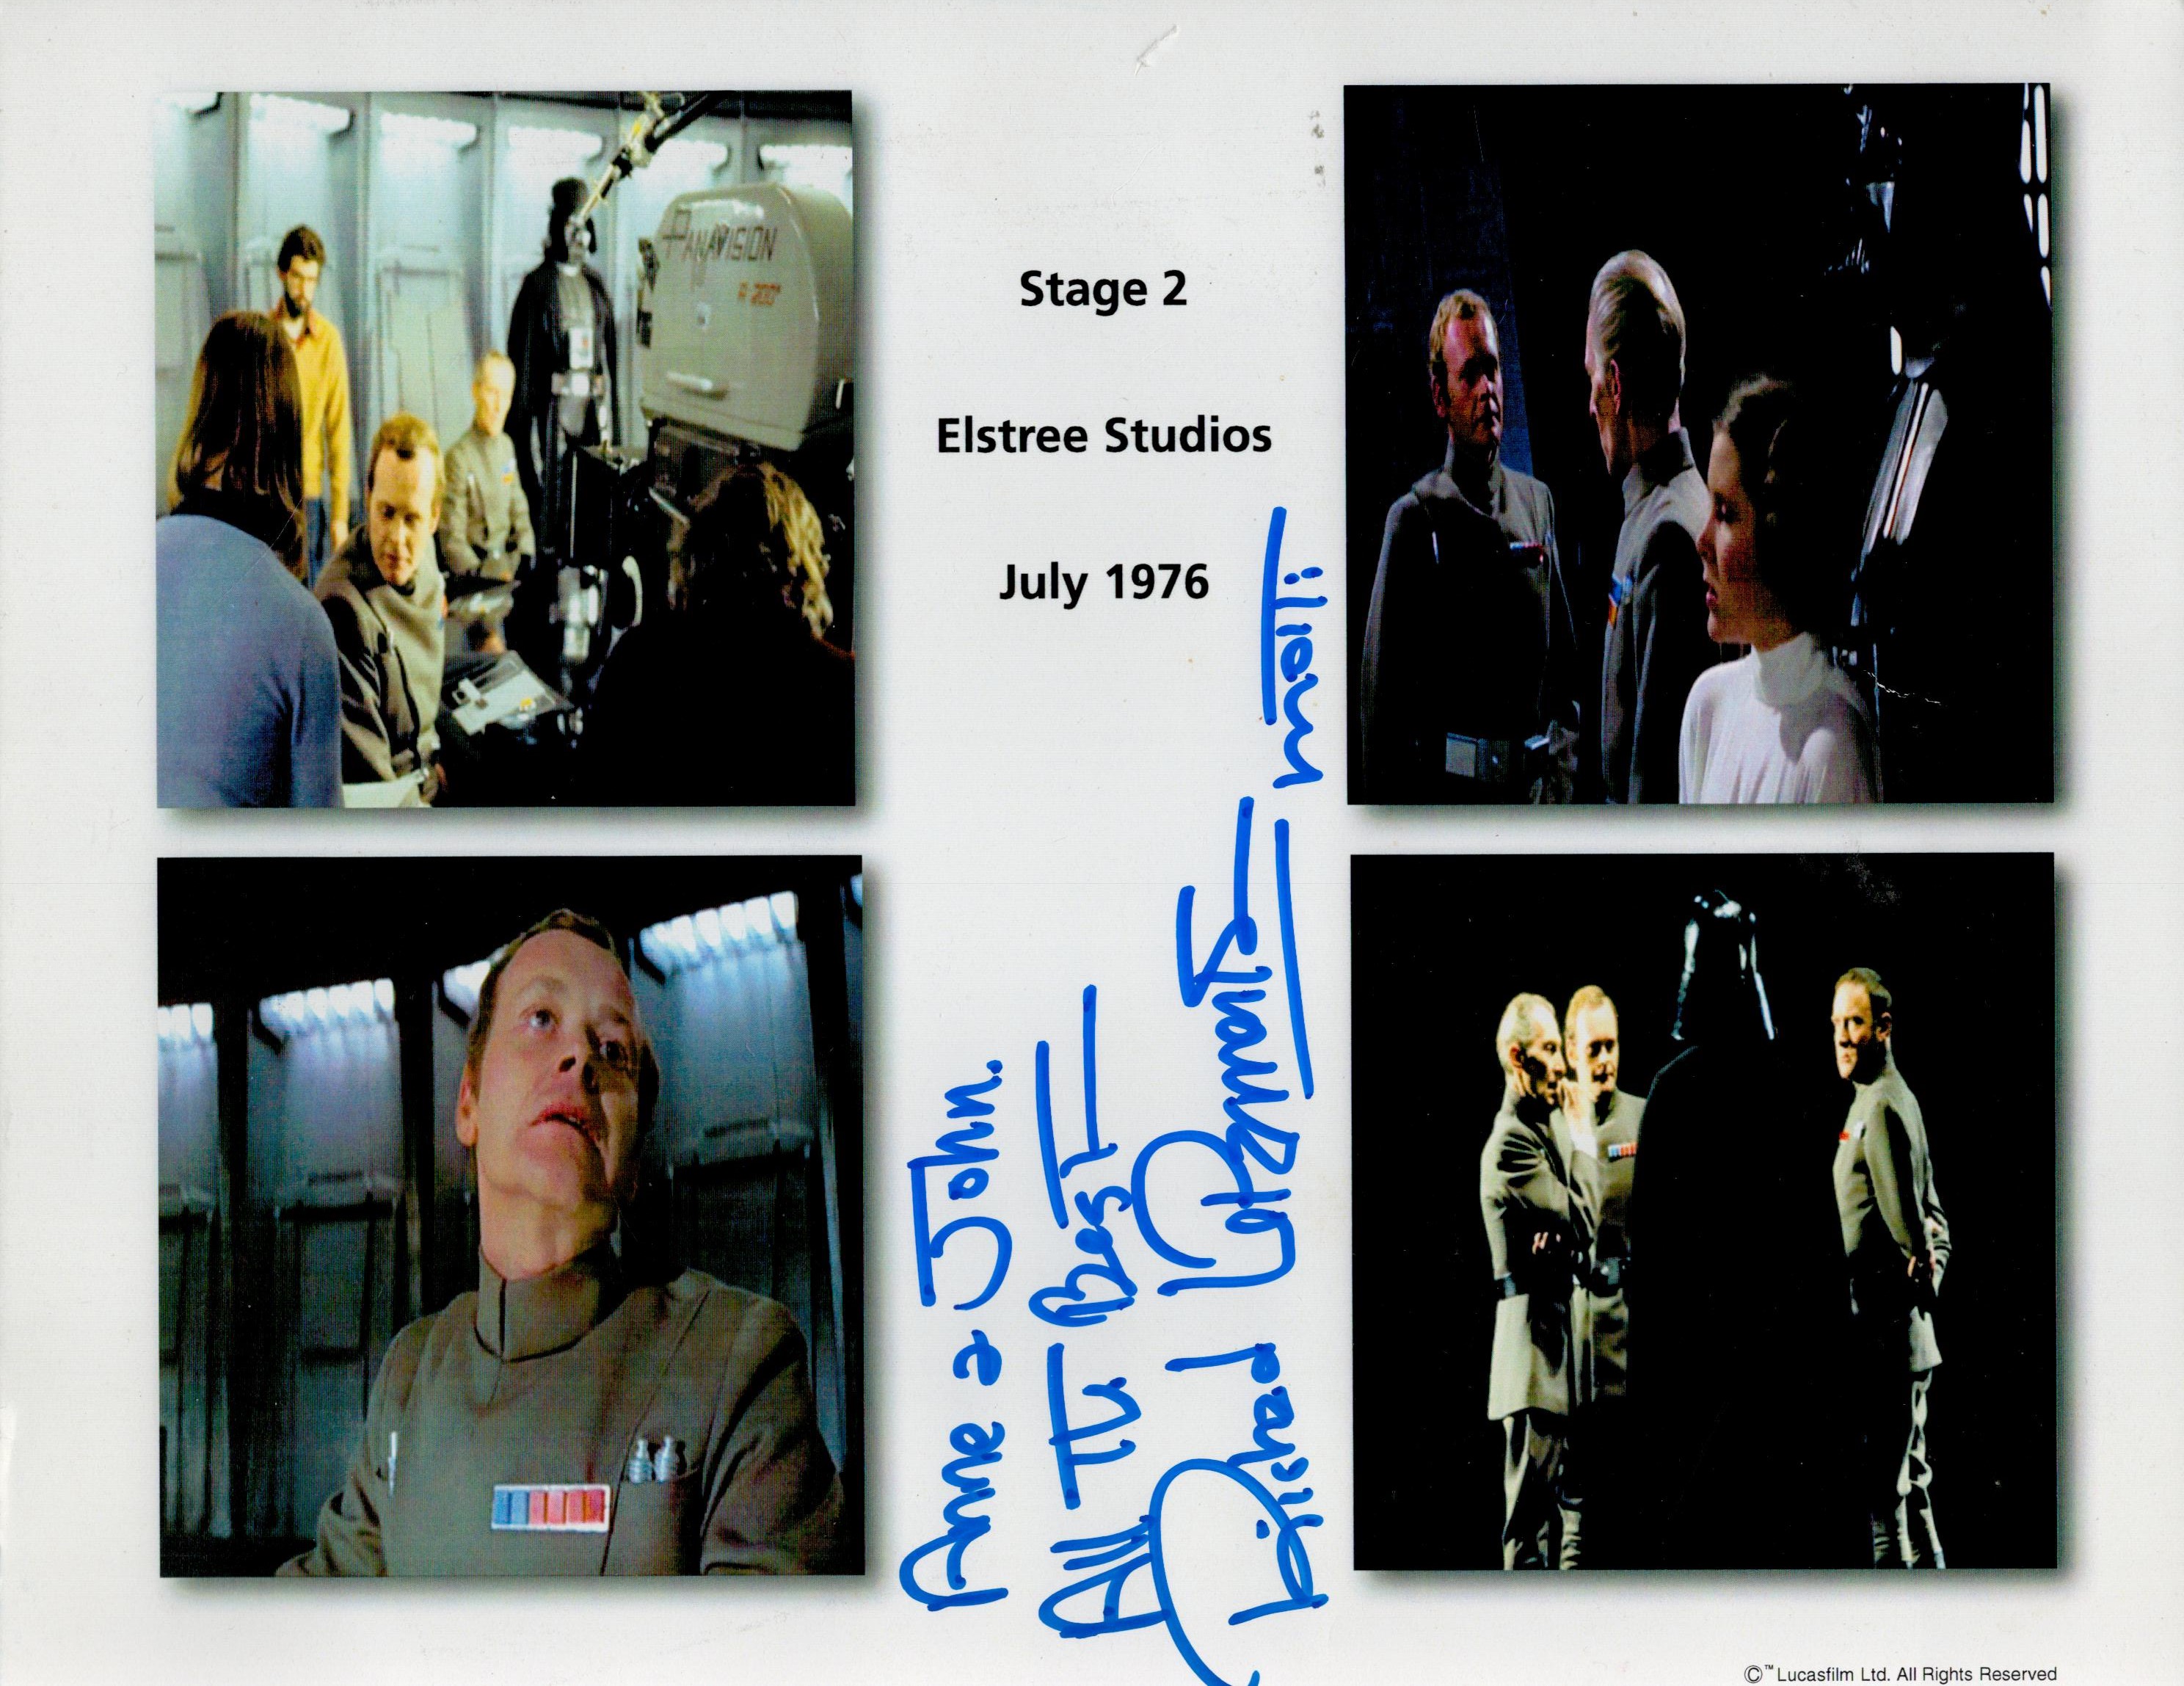 Richard LeParmentier's signed Admiral Motti signed 10x8 Star Wars montage photo. Dedicated. Good